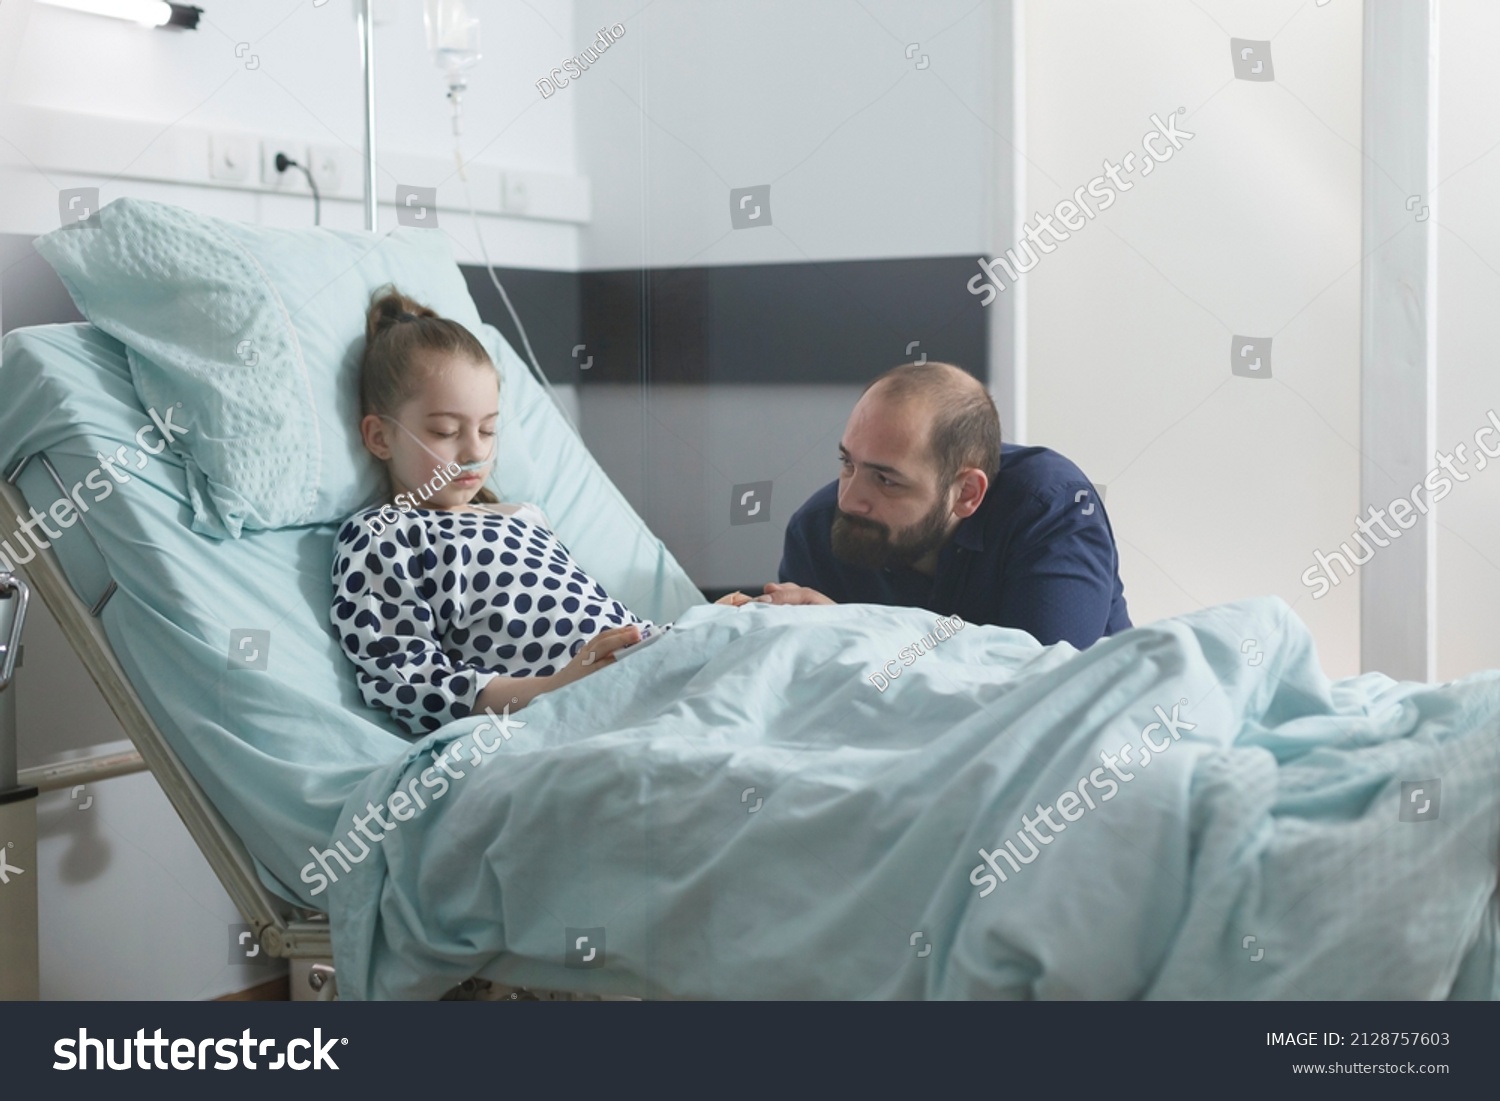 Worried sad uneasy father watching sick little daughter sleeping in hospital bed while in pediatric clinic patient room. Under treatment ill child resting while attentive parent taking care of her. #2128757603